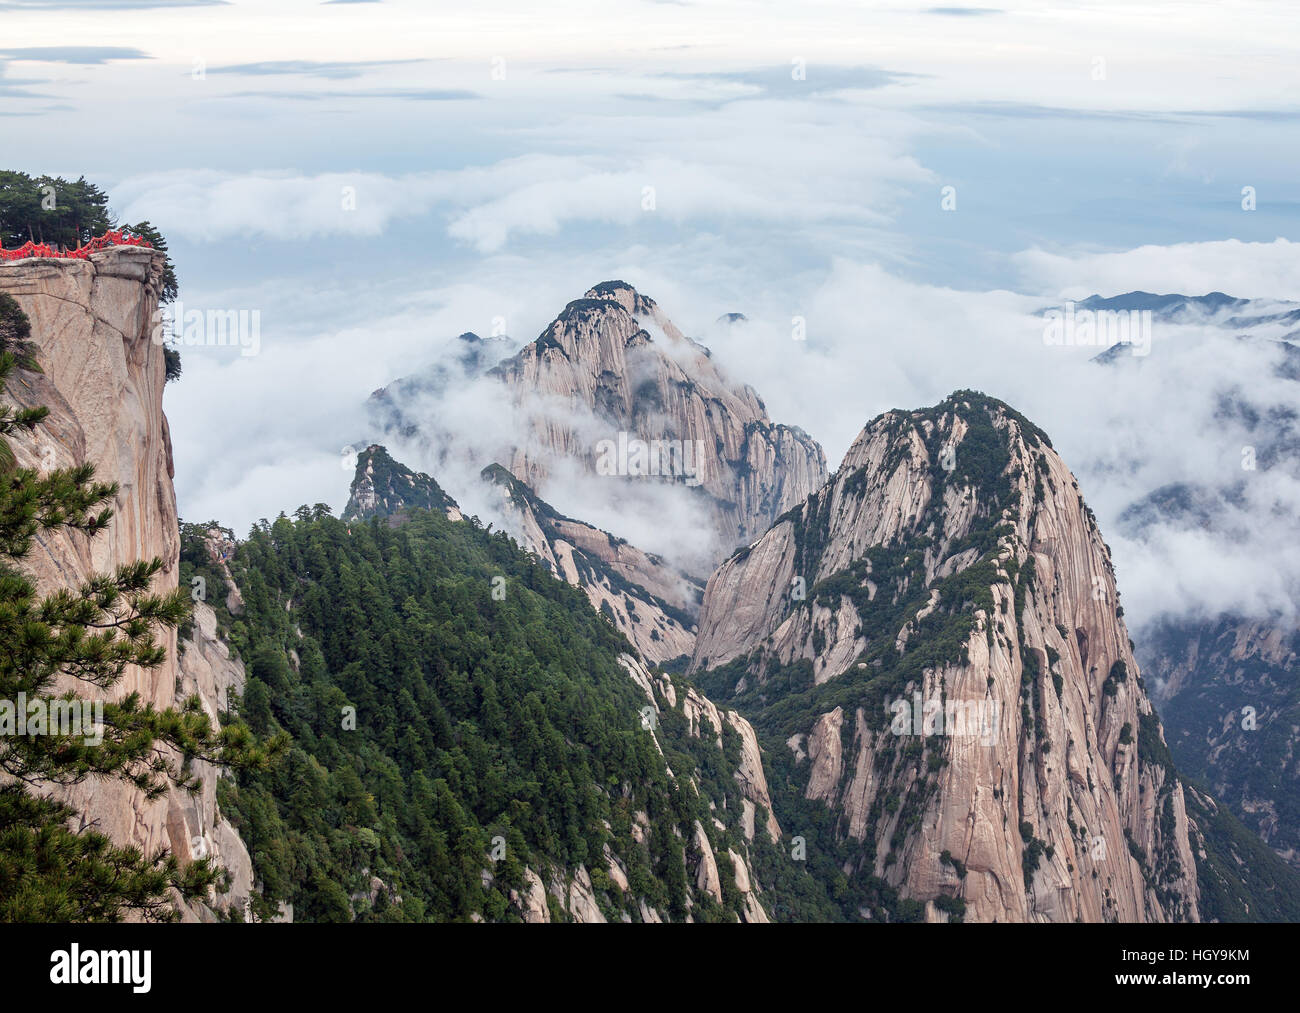 Picturesque view from the highest point of Huashan mountains, China at sunset. Stock Photo